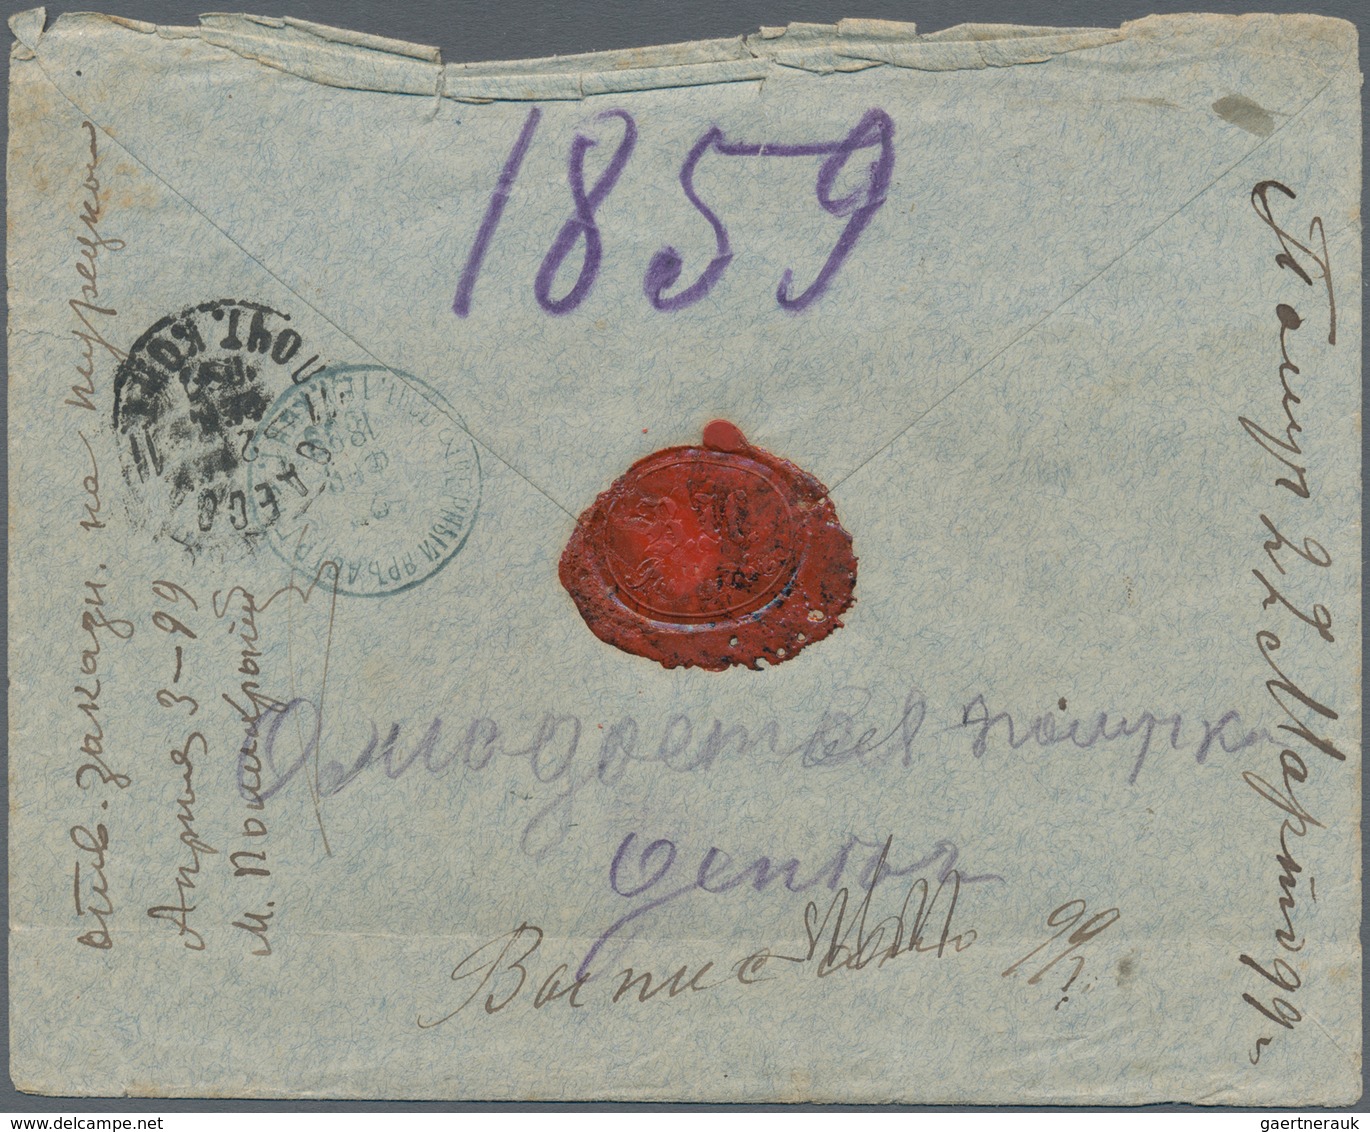 Russland: 1899 nine registered covers with different registration forms and labels in different cond